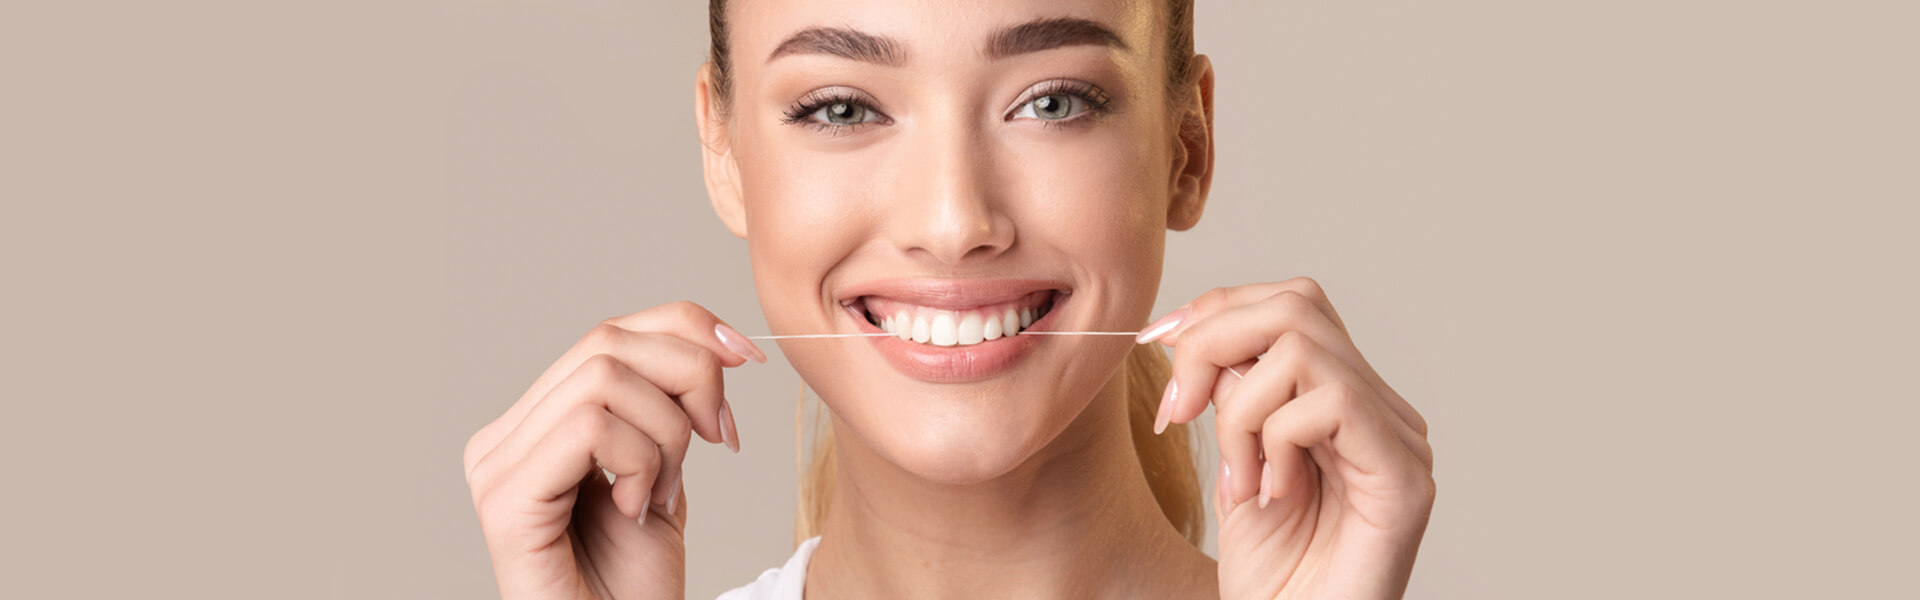 Why Flossing is so Important